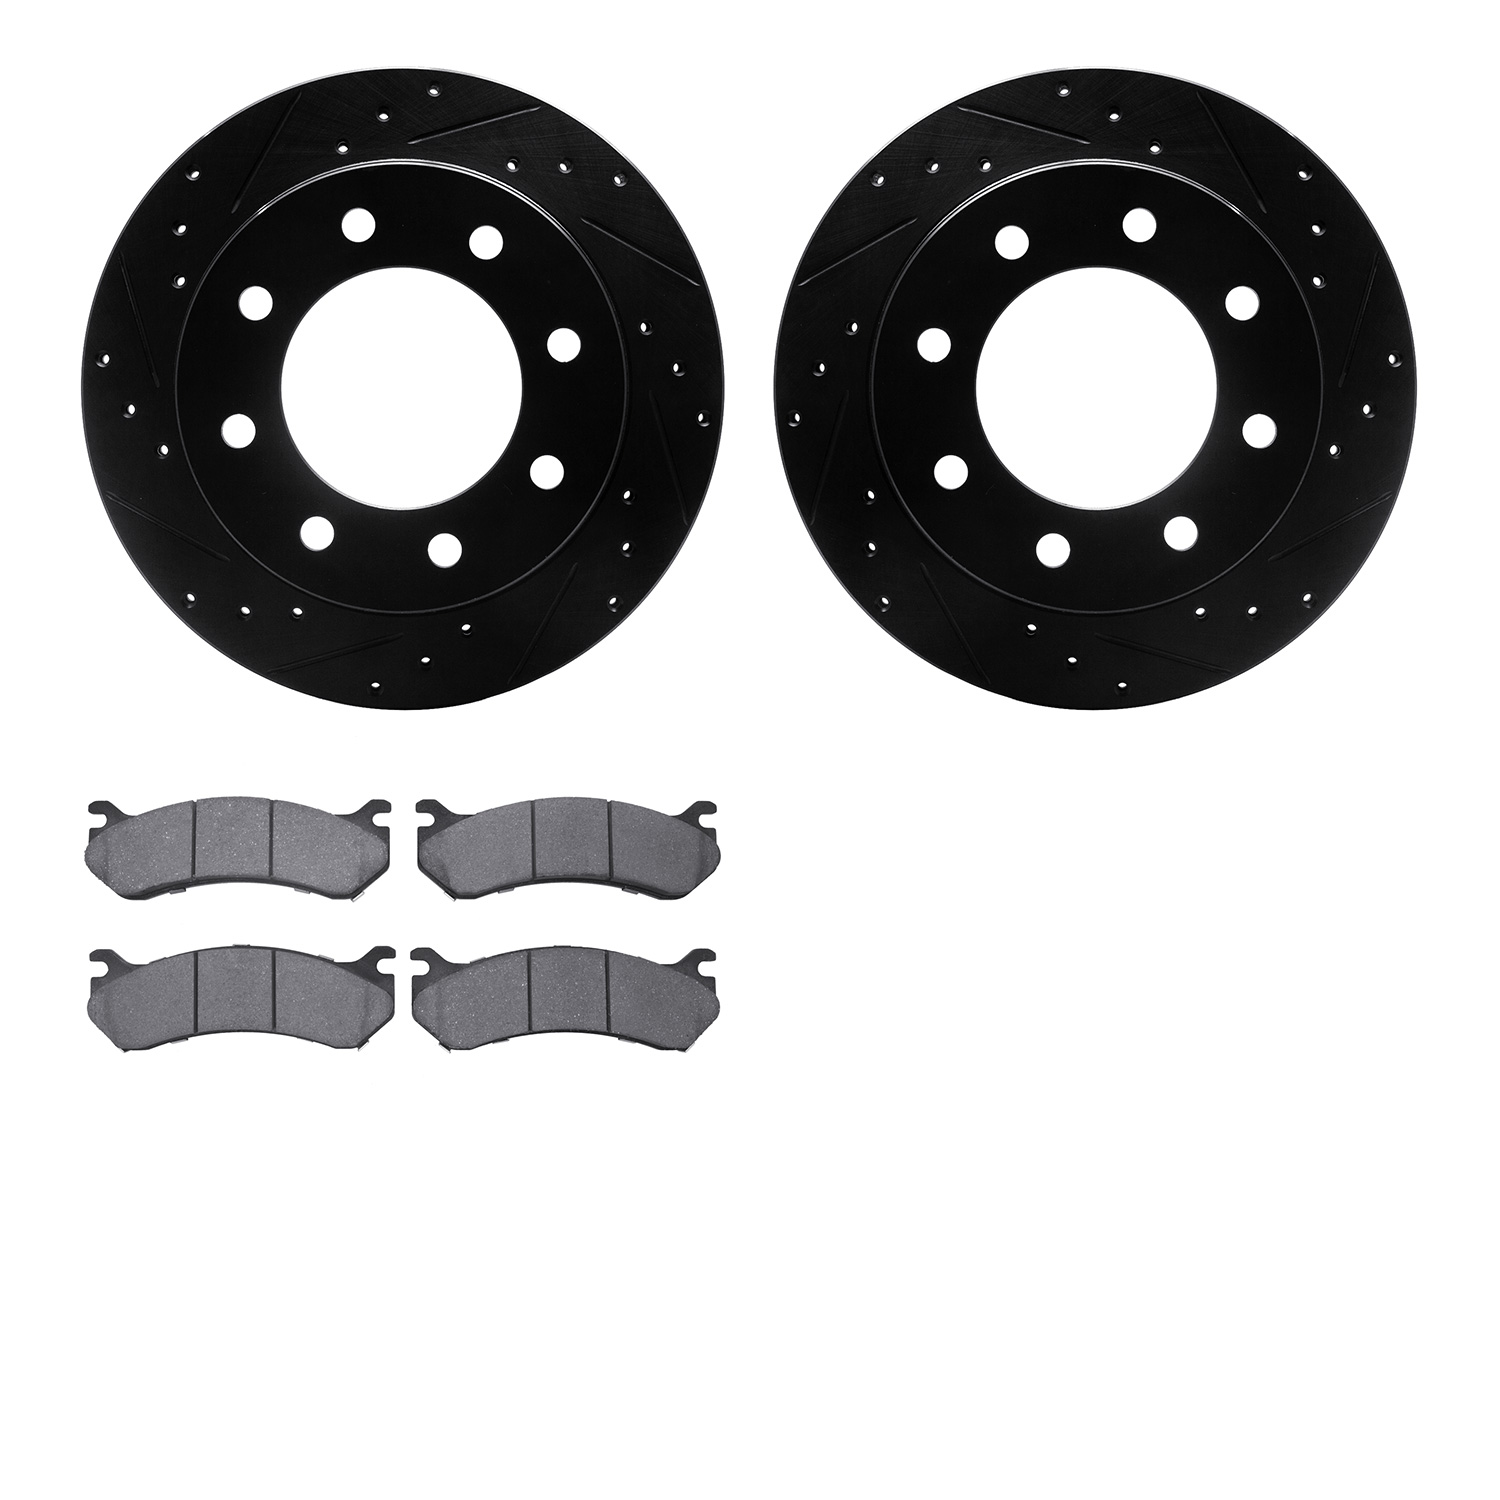 8402-48025 Drilled/Slotted Brake Rotors with Ultimate-Duty Brake Pads Kit [Black], 1999-2009 GM, Position: Rear